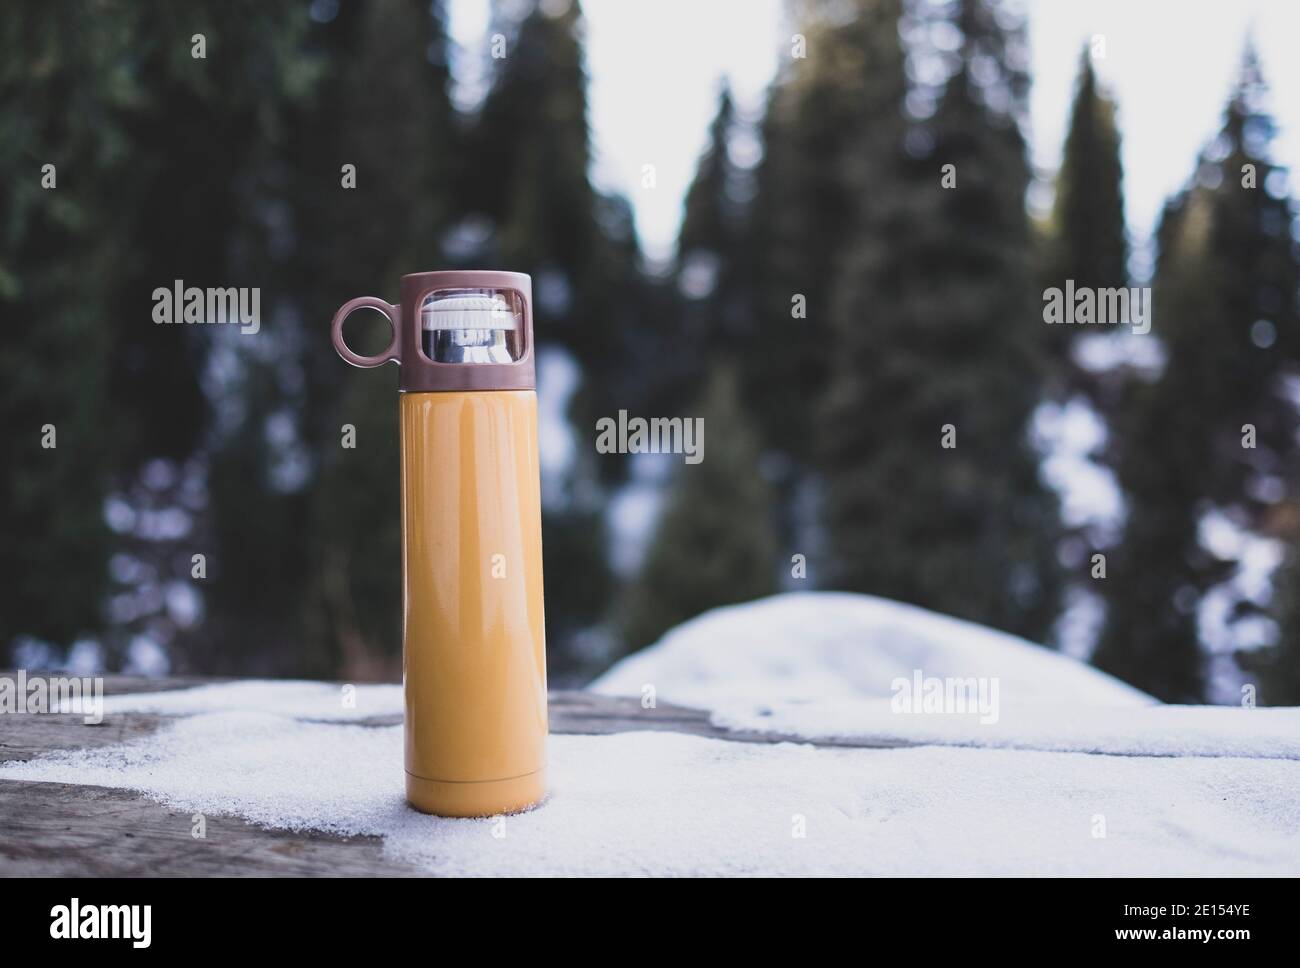 https://c8.alamy.com/comp/2E154YE/yellow-thermos-on-wooden-table-in-winter-outdoor-2E154YE.jpg